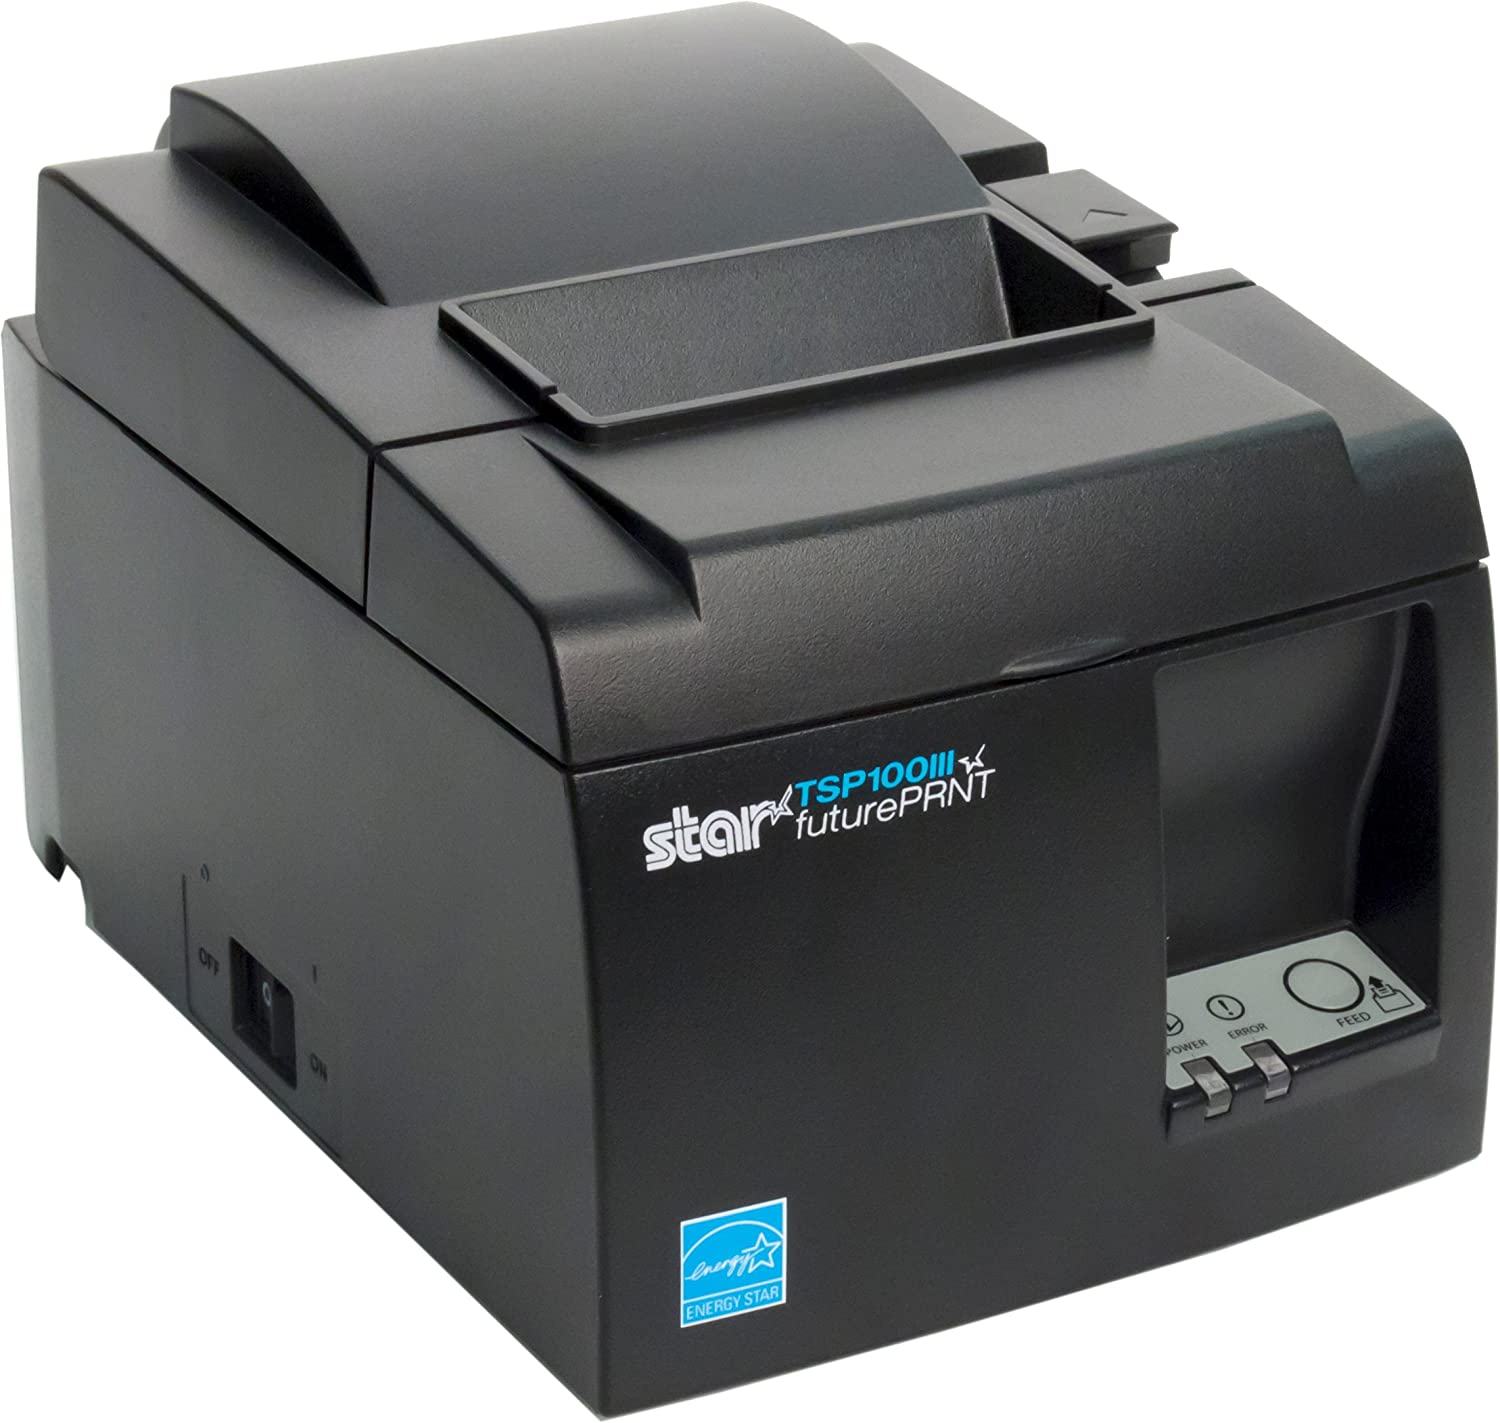 Star Micronics America TSP143III USB Thermal Receipt Printer with Device and Mfi USB Ports, Auto-Cutter, and Internal Power Supply - Gray